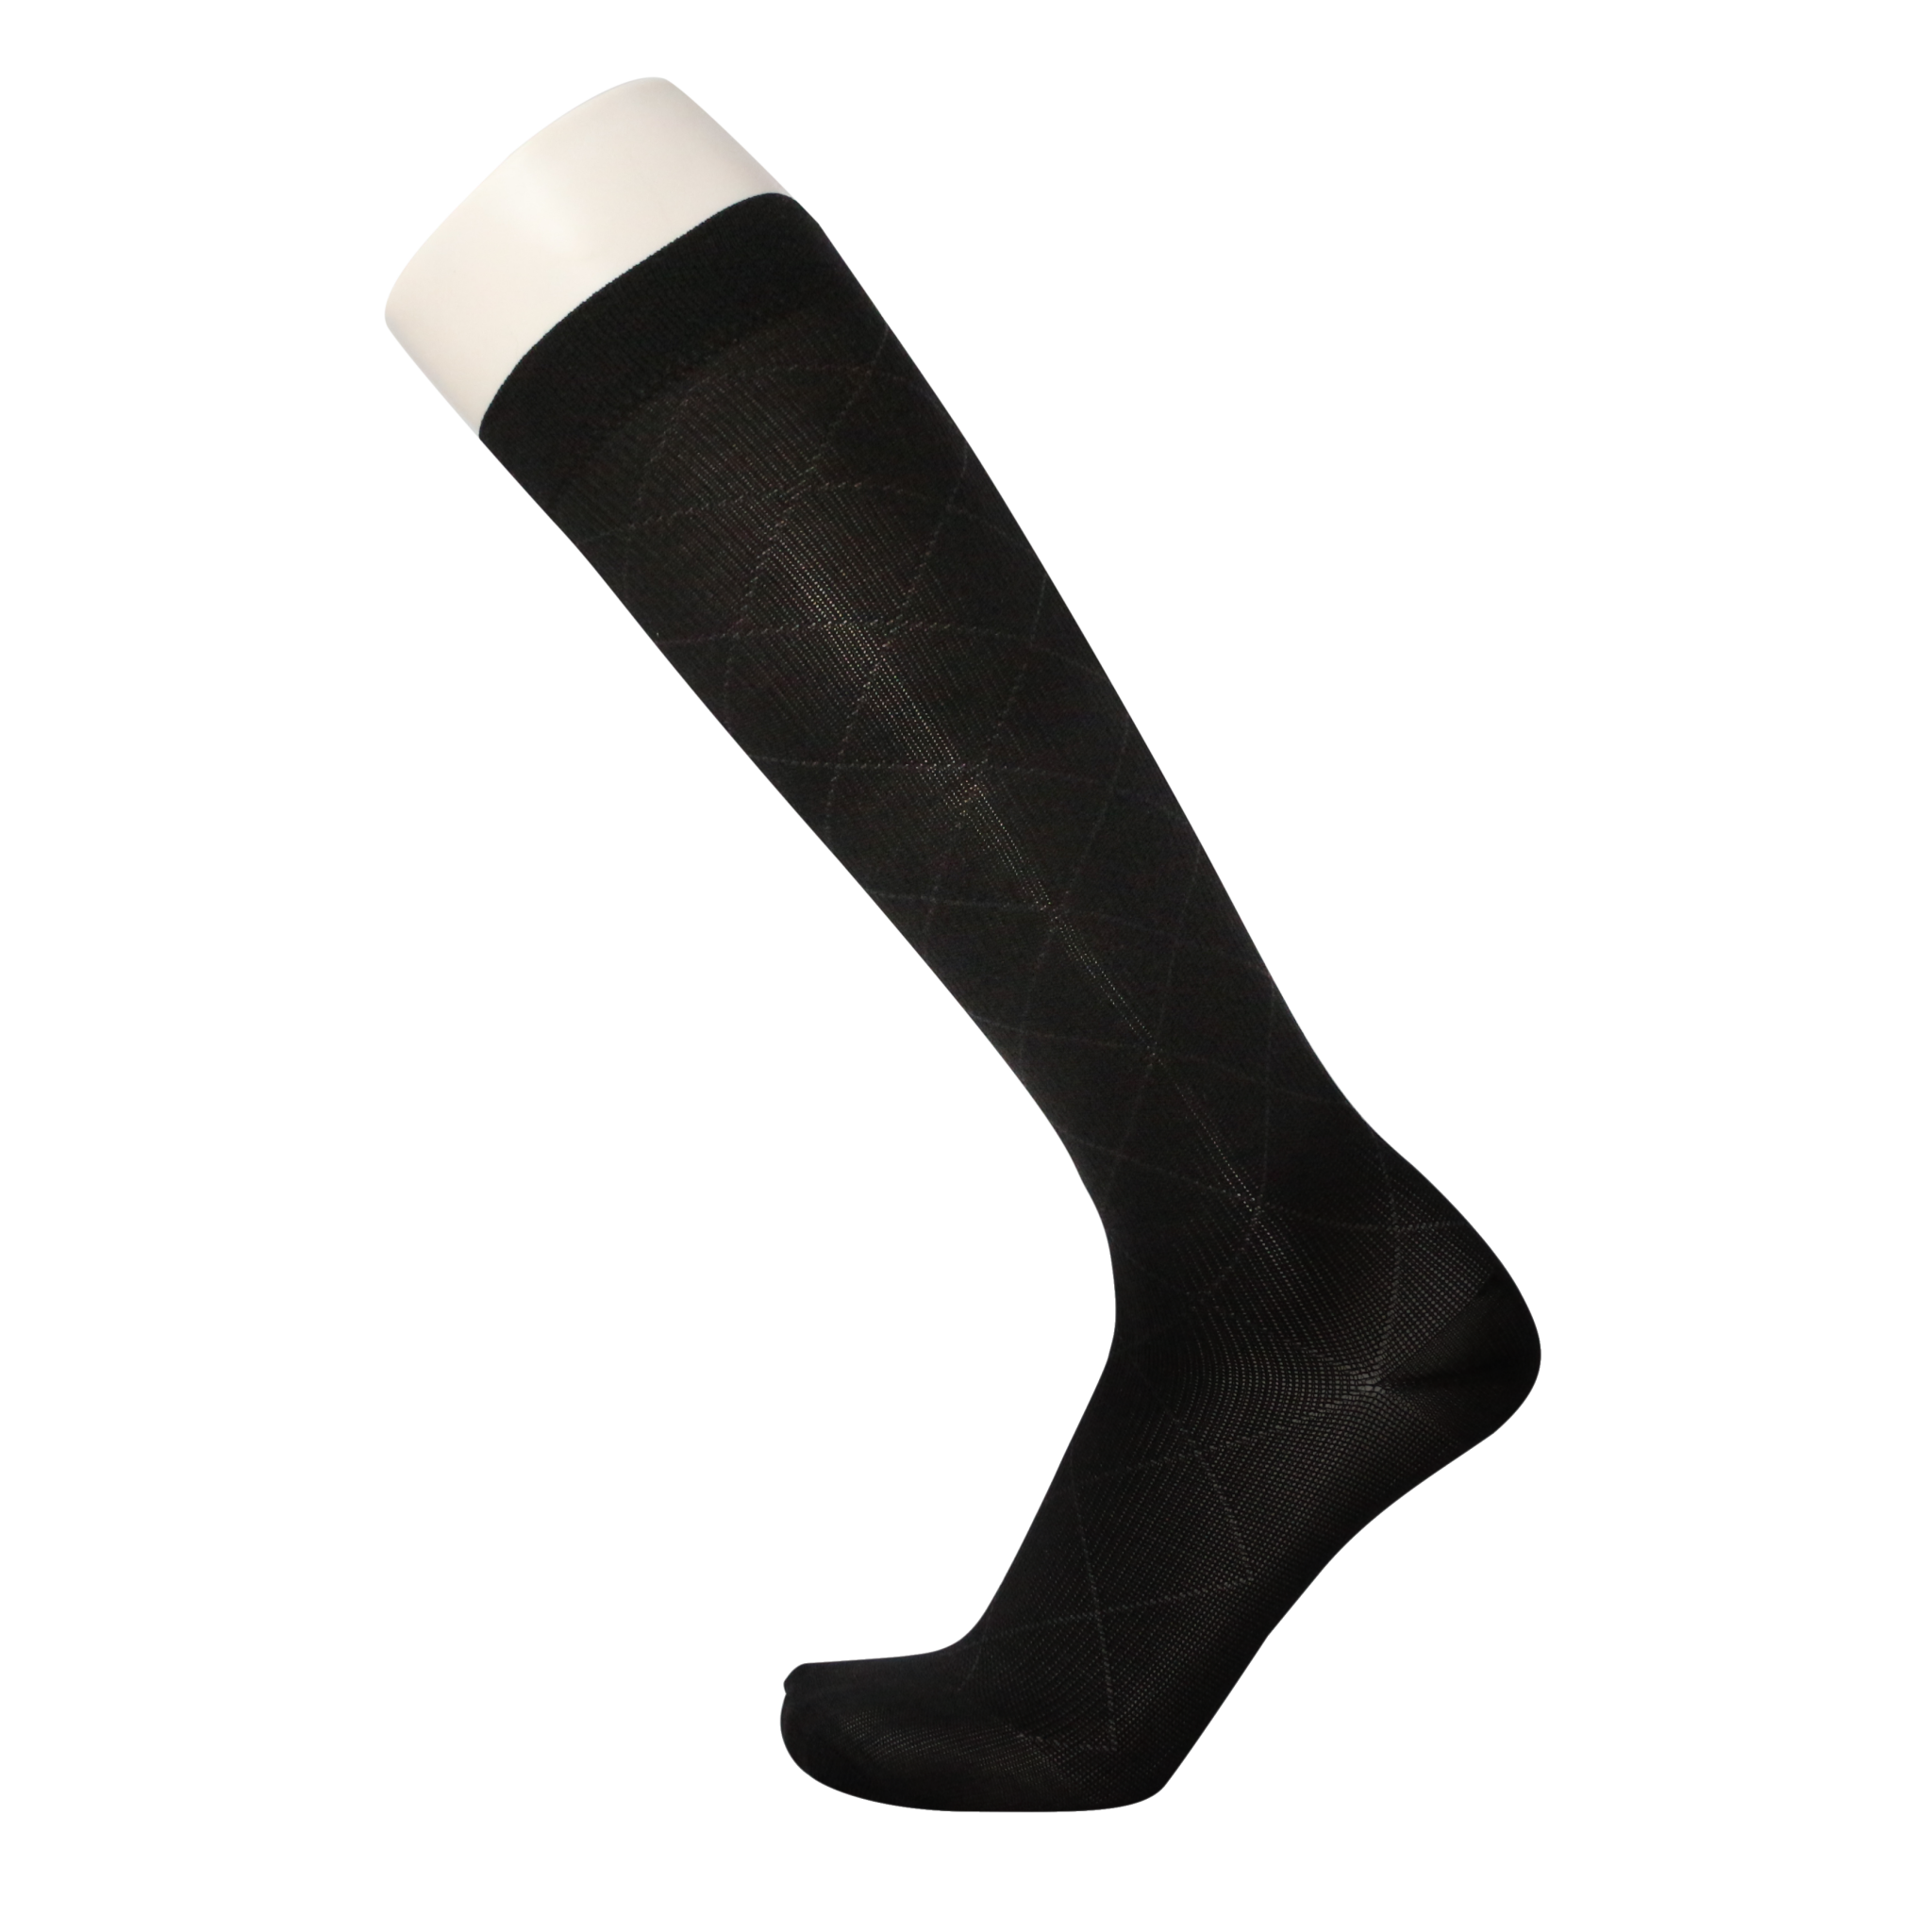 Light Compression Knee Socks 8-15mmHg For Travelling - 2 Pairs - Women